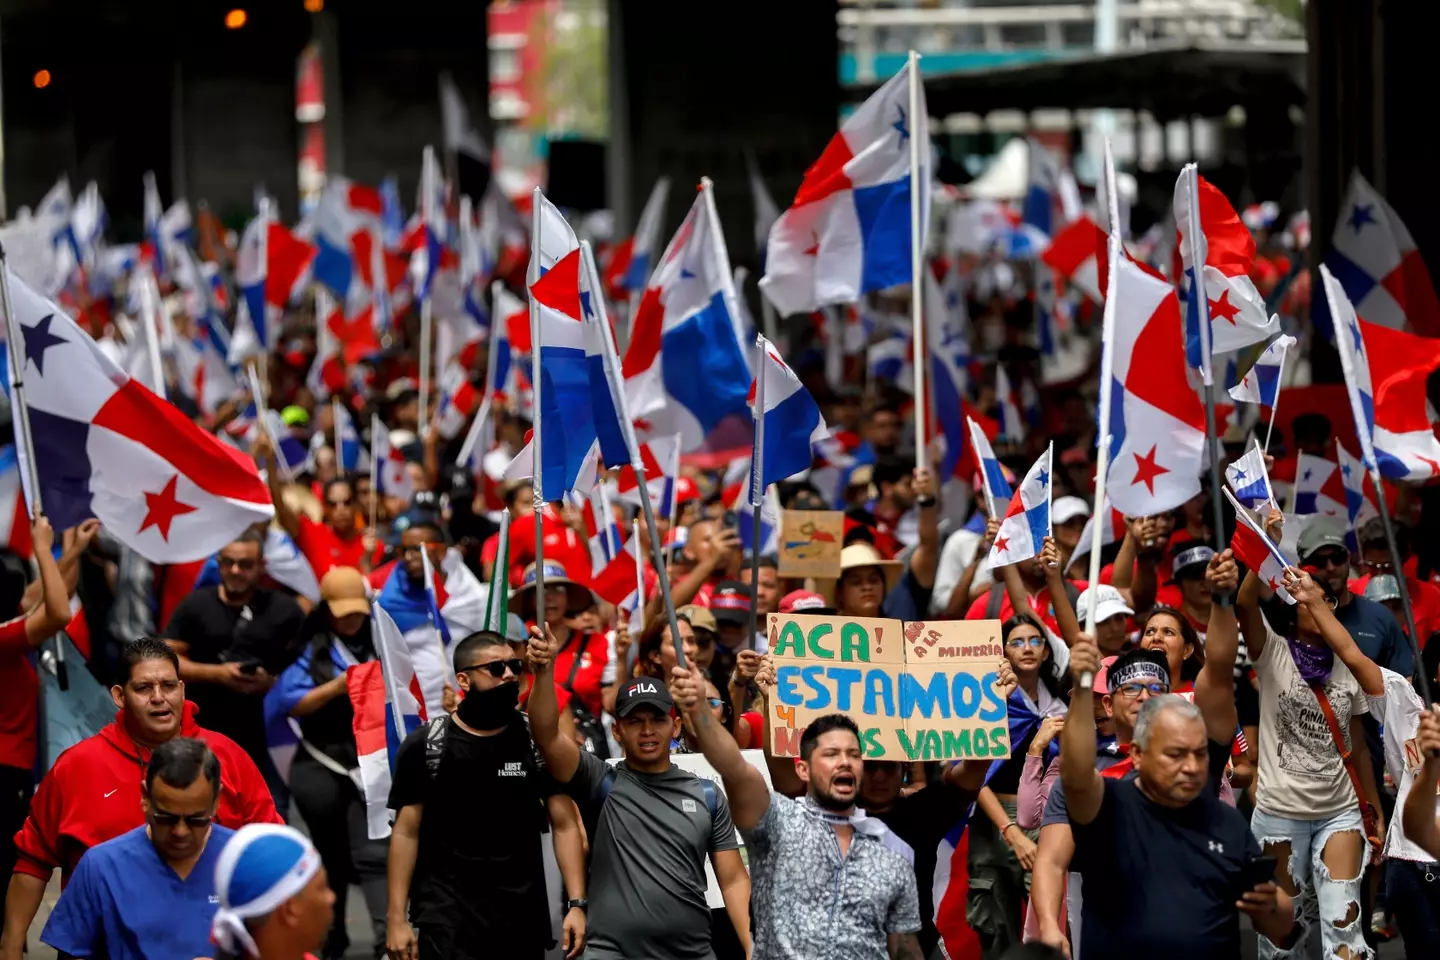 People in Panama have been protesting the country's new mining deal.